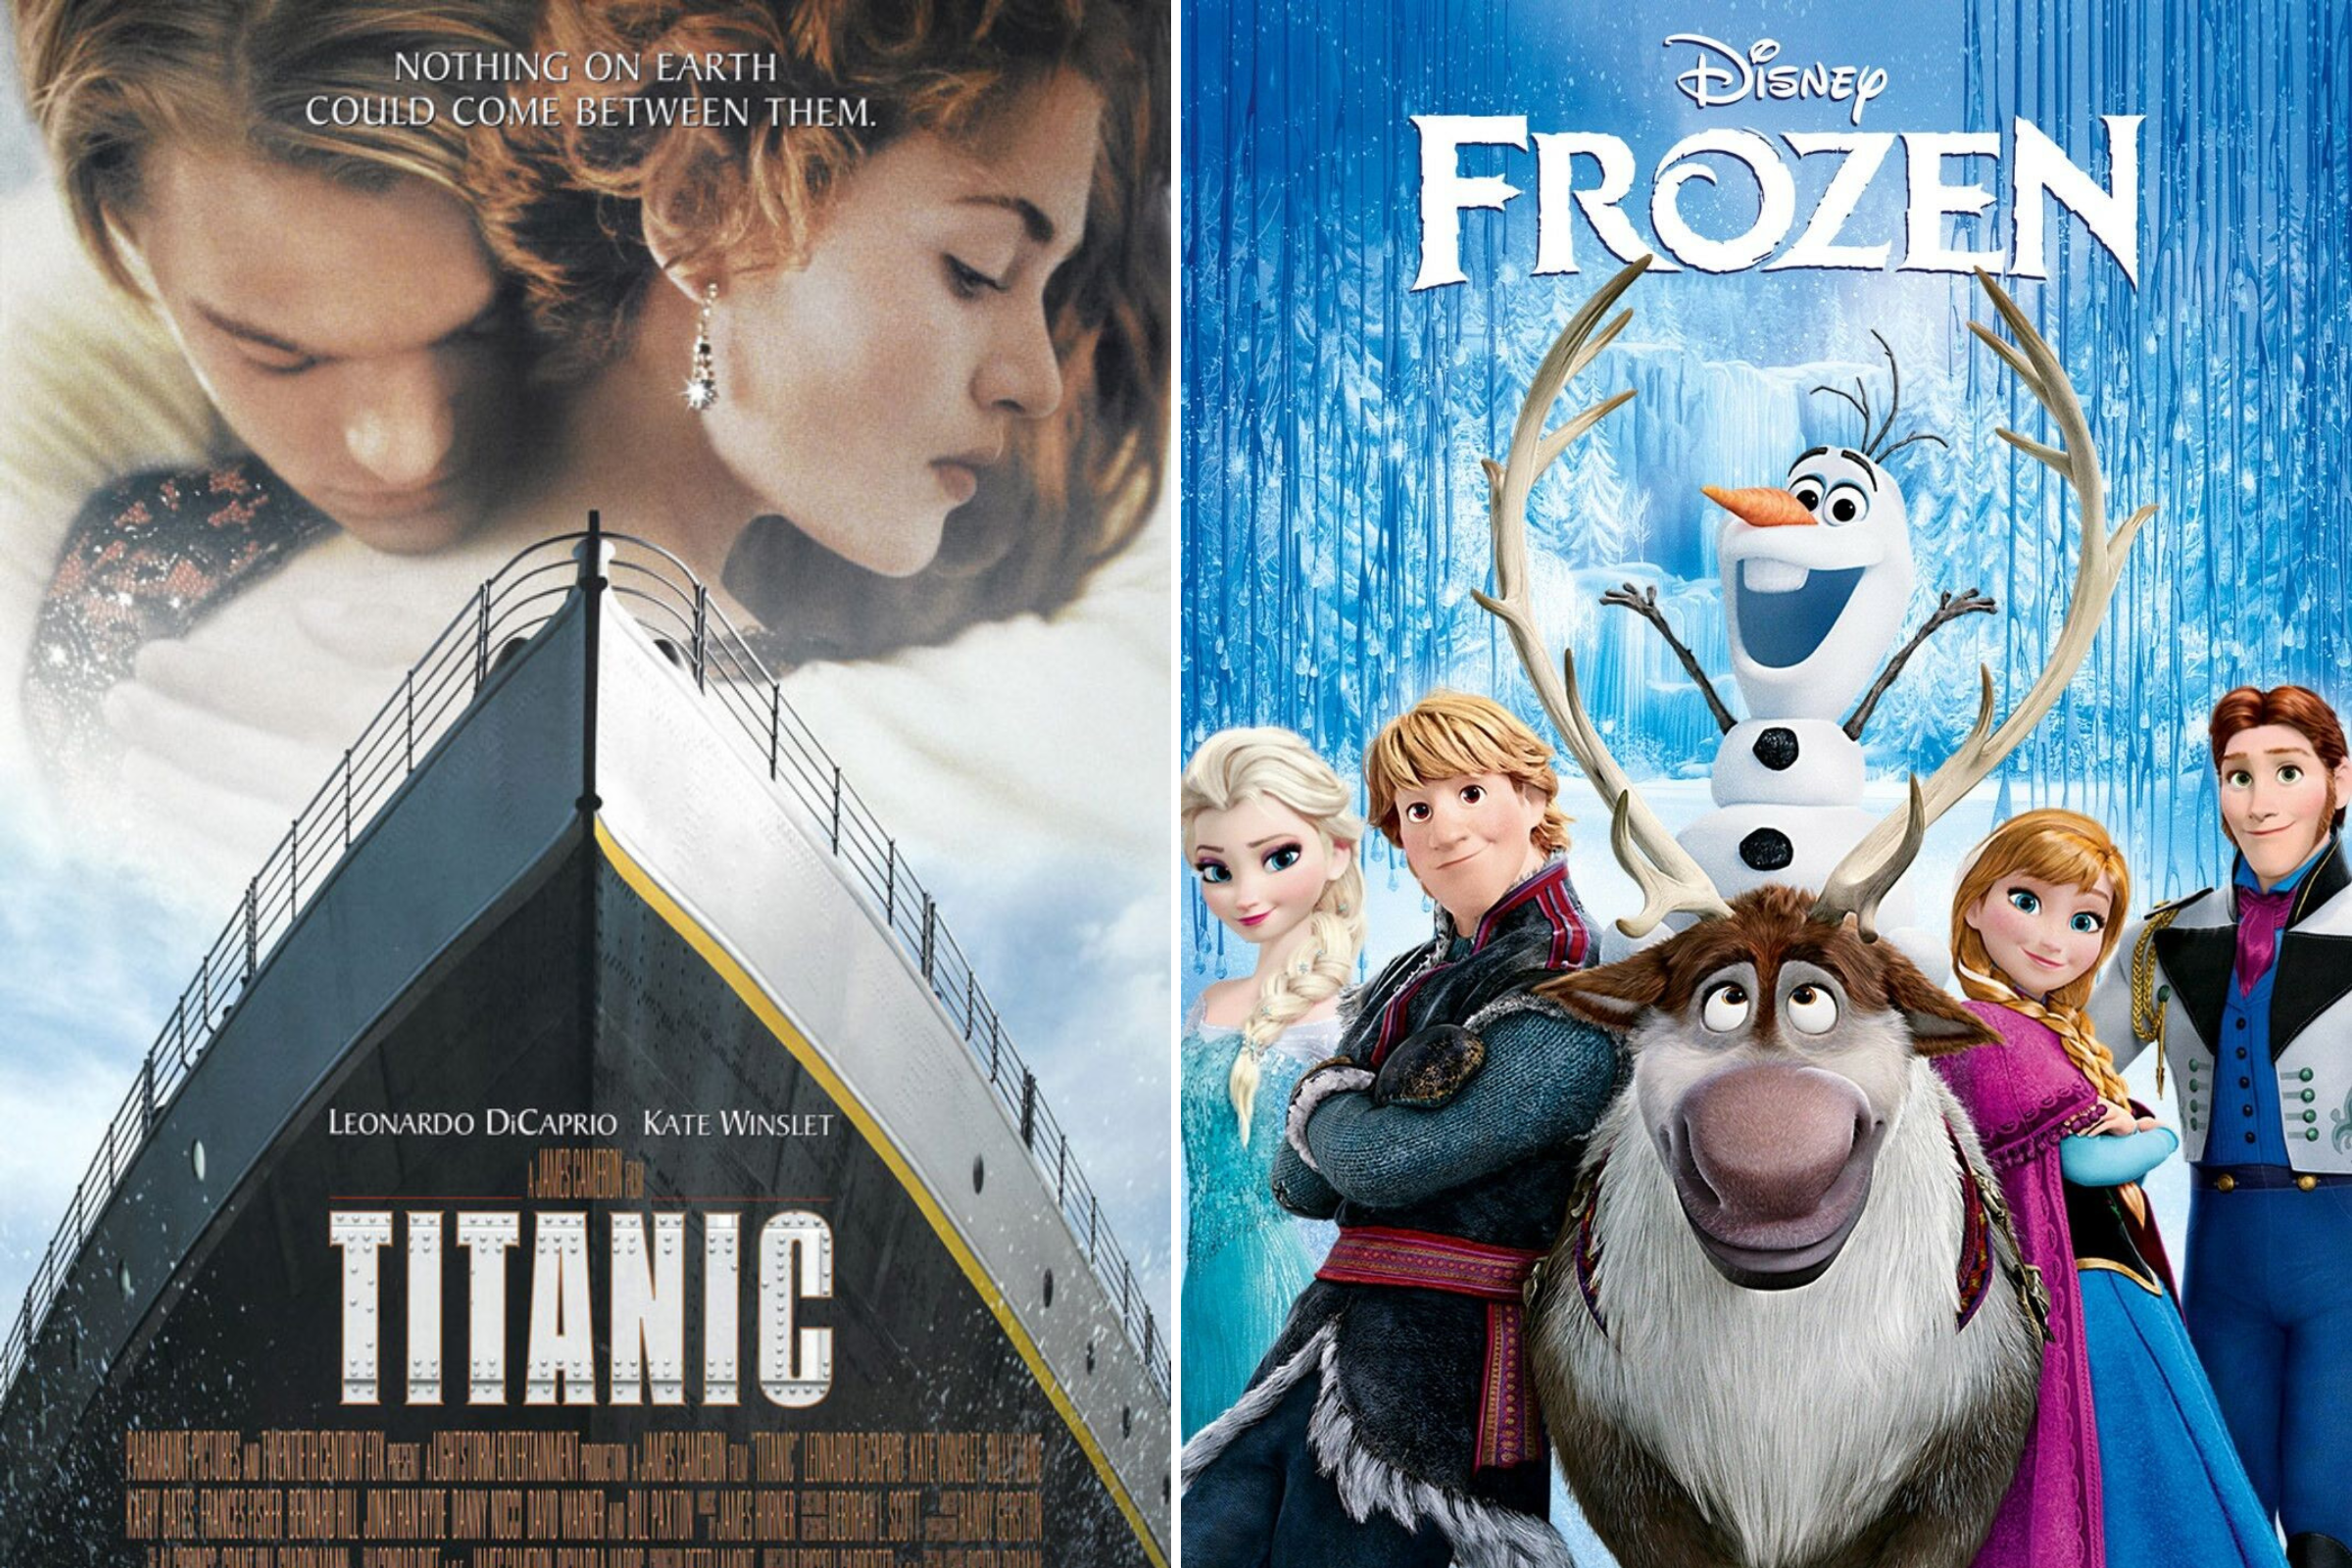 Fan Spots 'Titanic' Easter Egg in 'Frozen': 'Never Seen Anyone Find This'